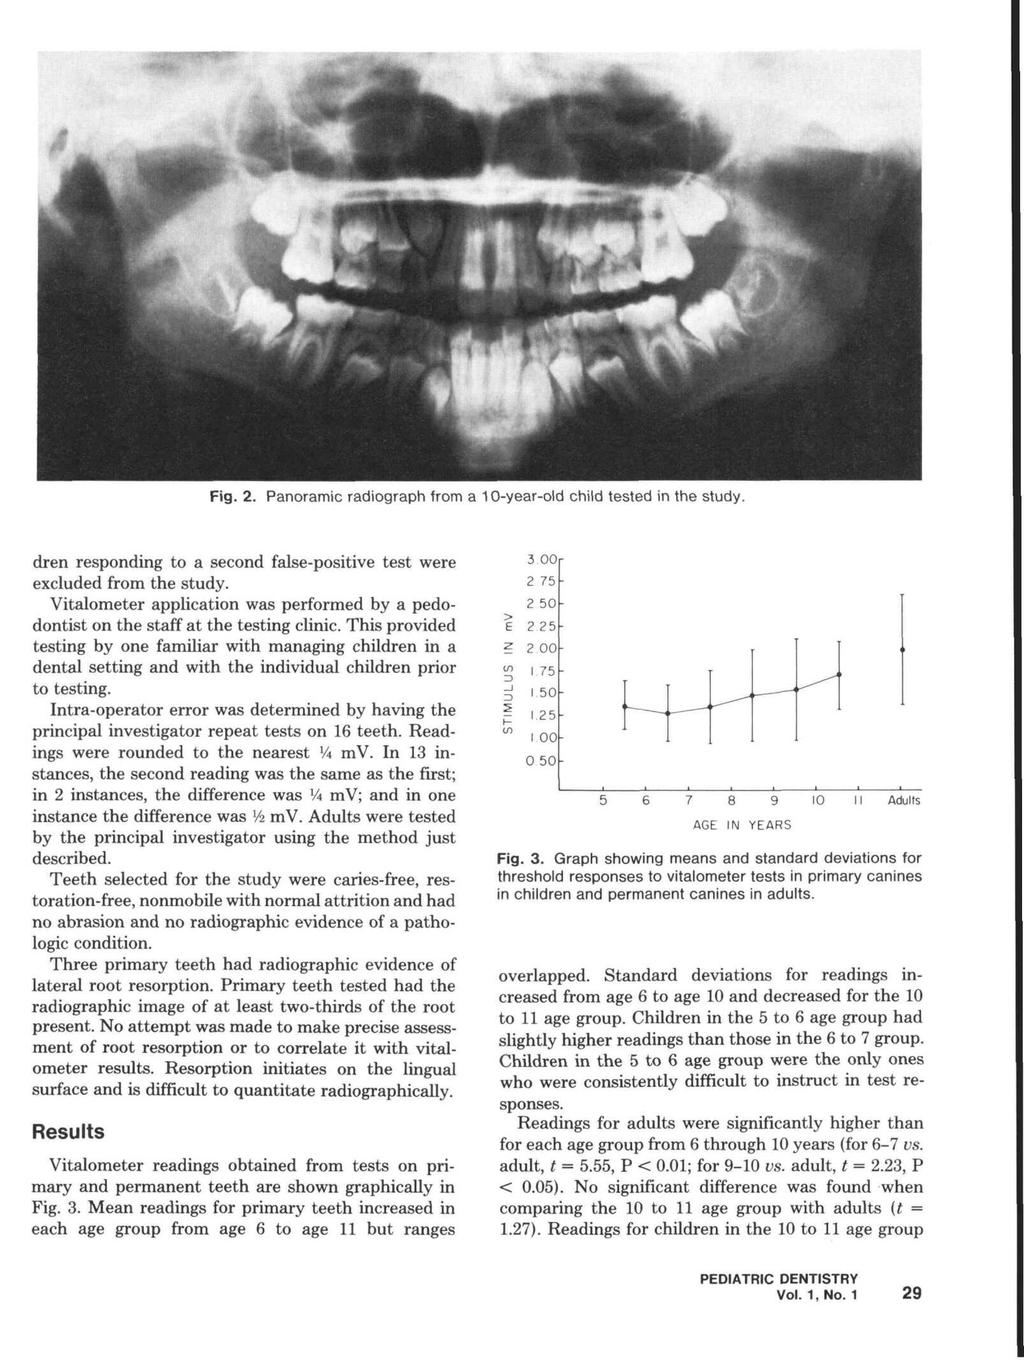 Fig. 2. Panoramic radiograph from a 10-year-old child tested in the study. dren responding to a second false-positive test were excluded from the study.